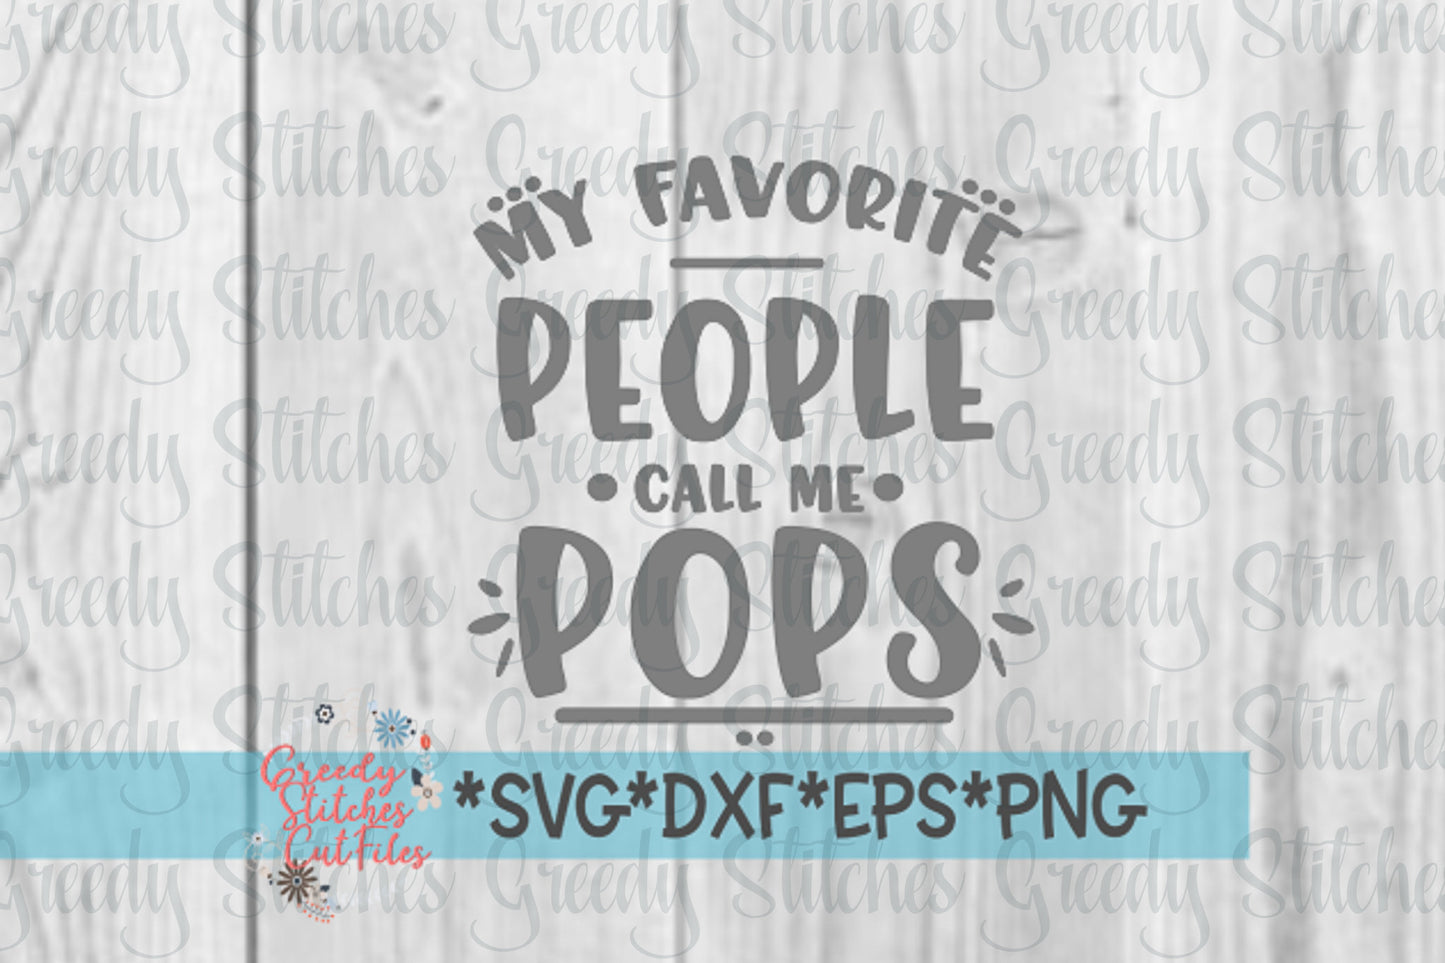 Father&#39;s Day SVG | My Favorite People Call Me Pops SVG | Pops svg, dxf, eps, png. Pops SVG | Father&#39;s Day SvG | Instant Download Cut File